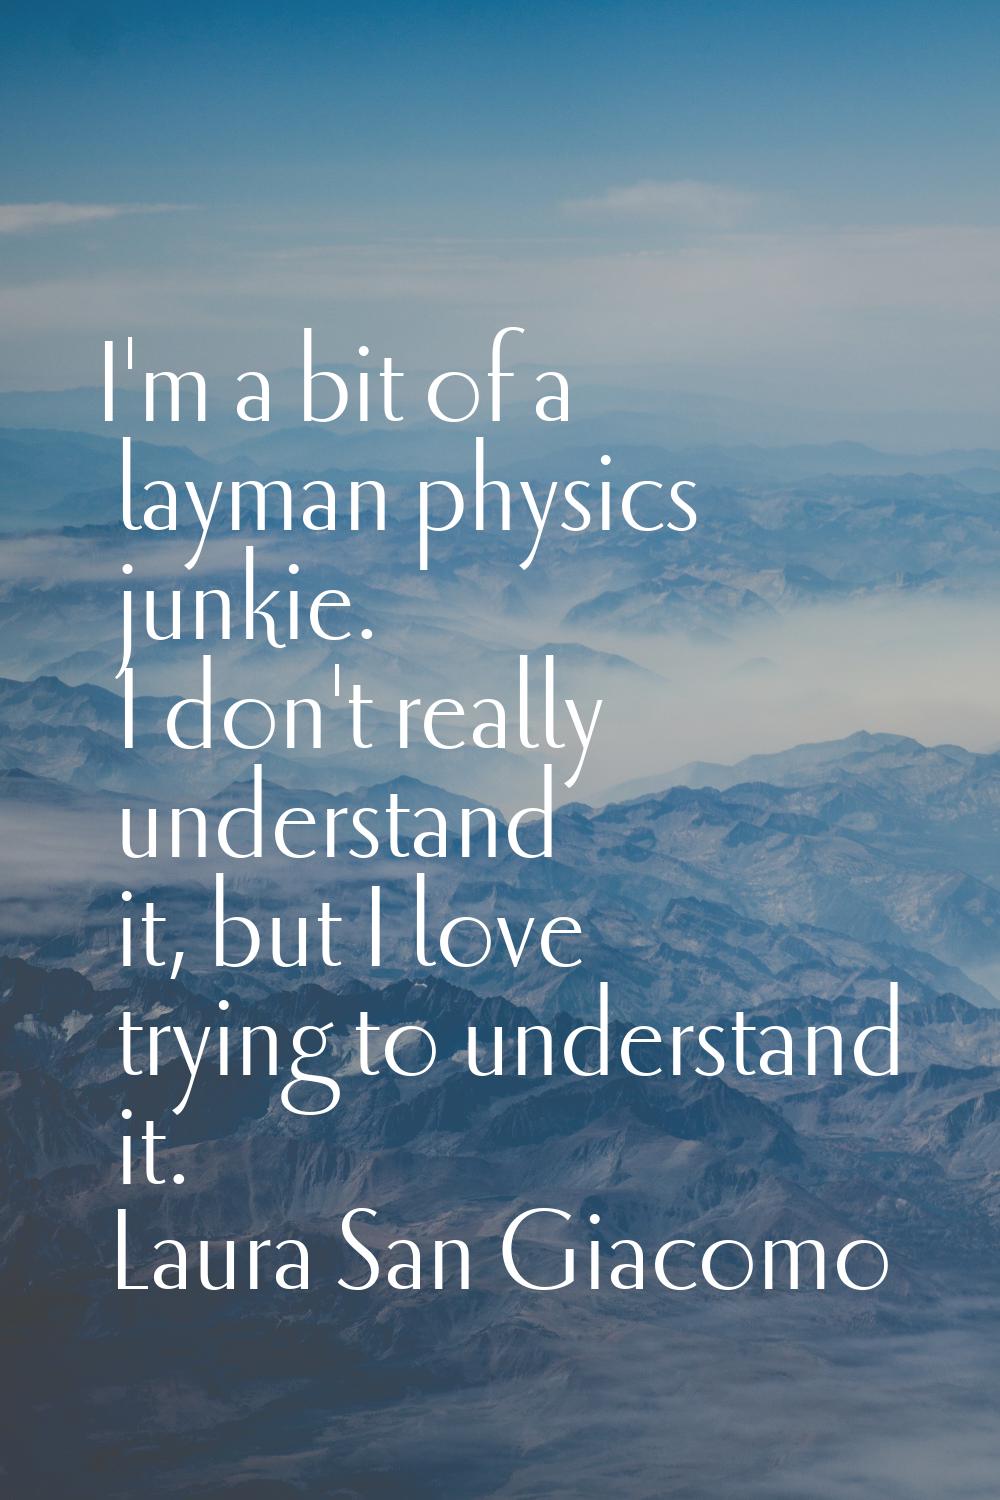 I'm a bit of a layman physics junkie. I don't really understand it, but I love trying to understand